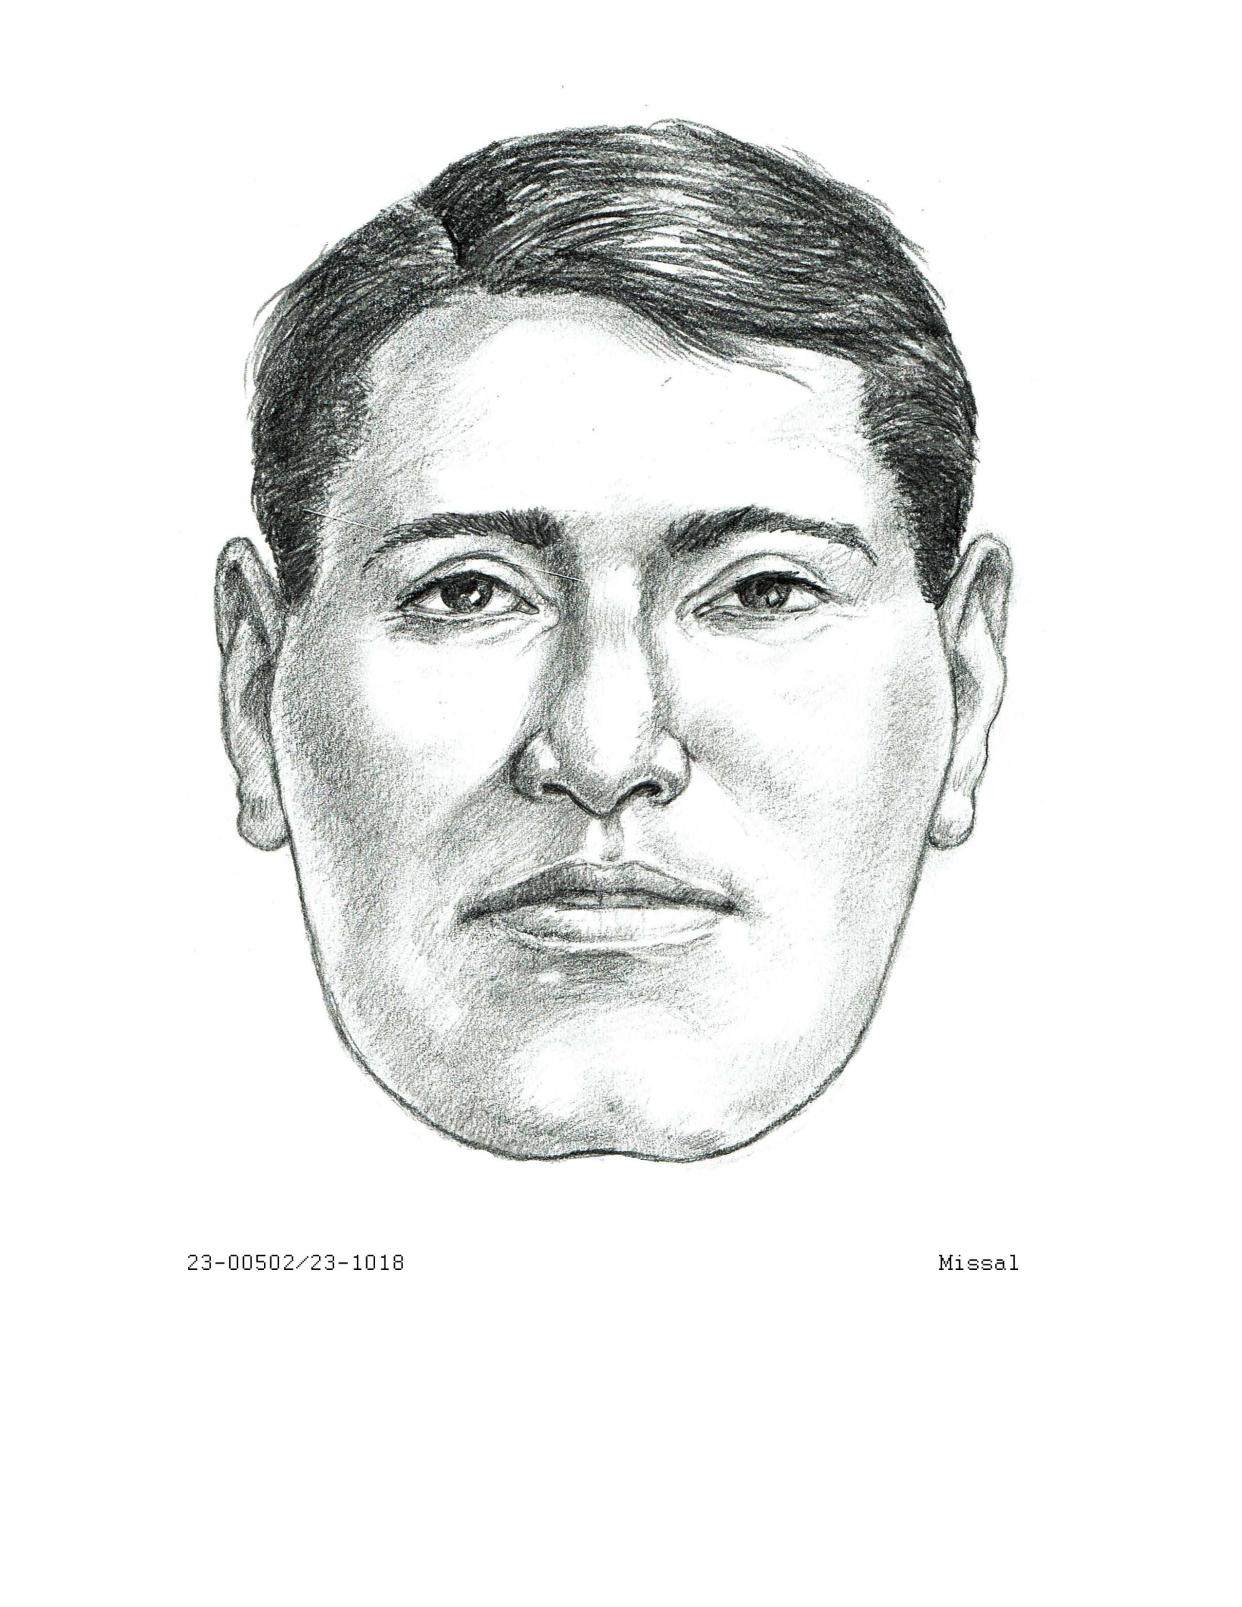 Phoenix police released a composite sketch of a man whose skeletal remains were found at South Mountain Park in January 2023. They announced on Aug. 4, 2023, that the victim was identified as Jerole Tsinnijinnie, 31.